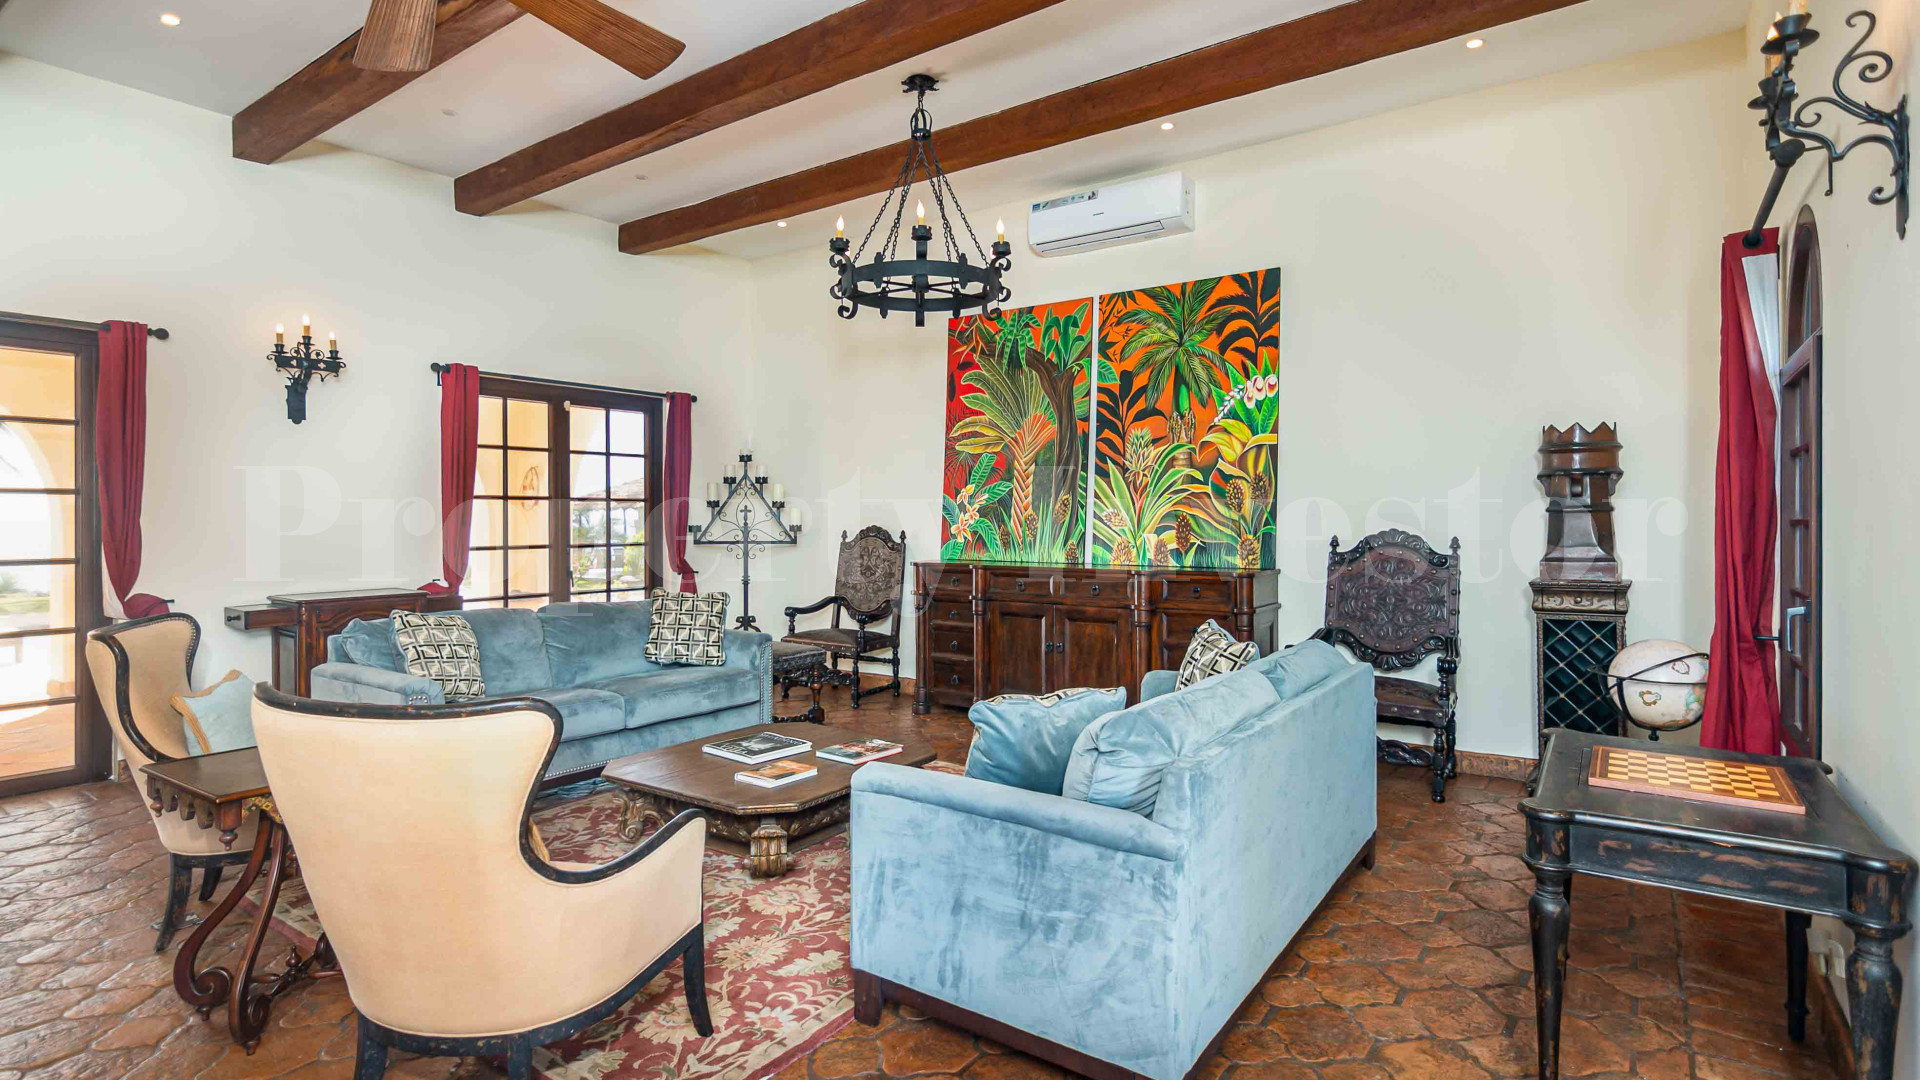 Stunning 4 Bedroom Luxury Spanish Colonial Revival Home for Sale in Pedasí, Panama